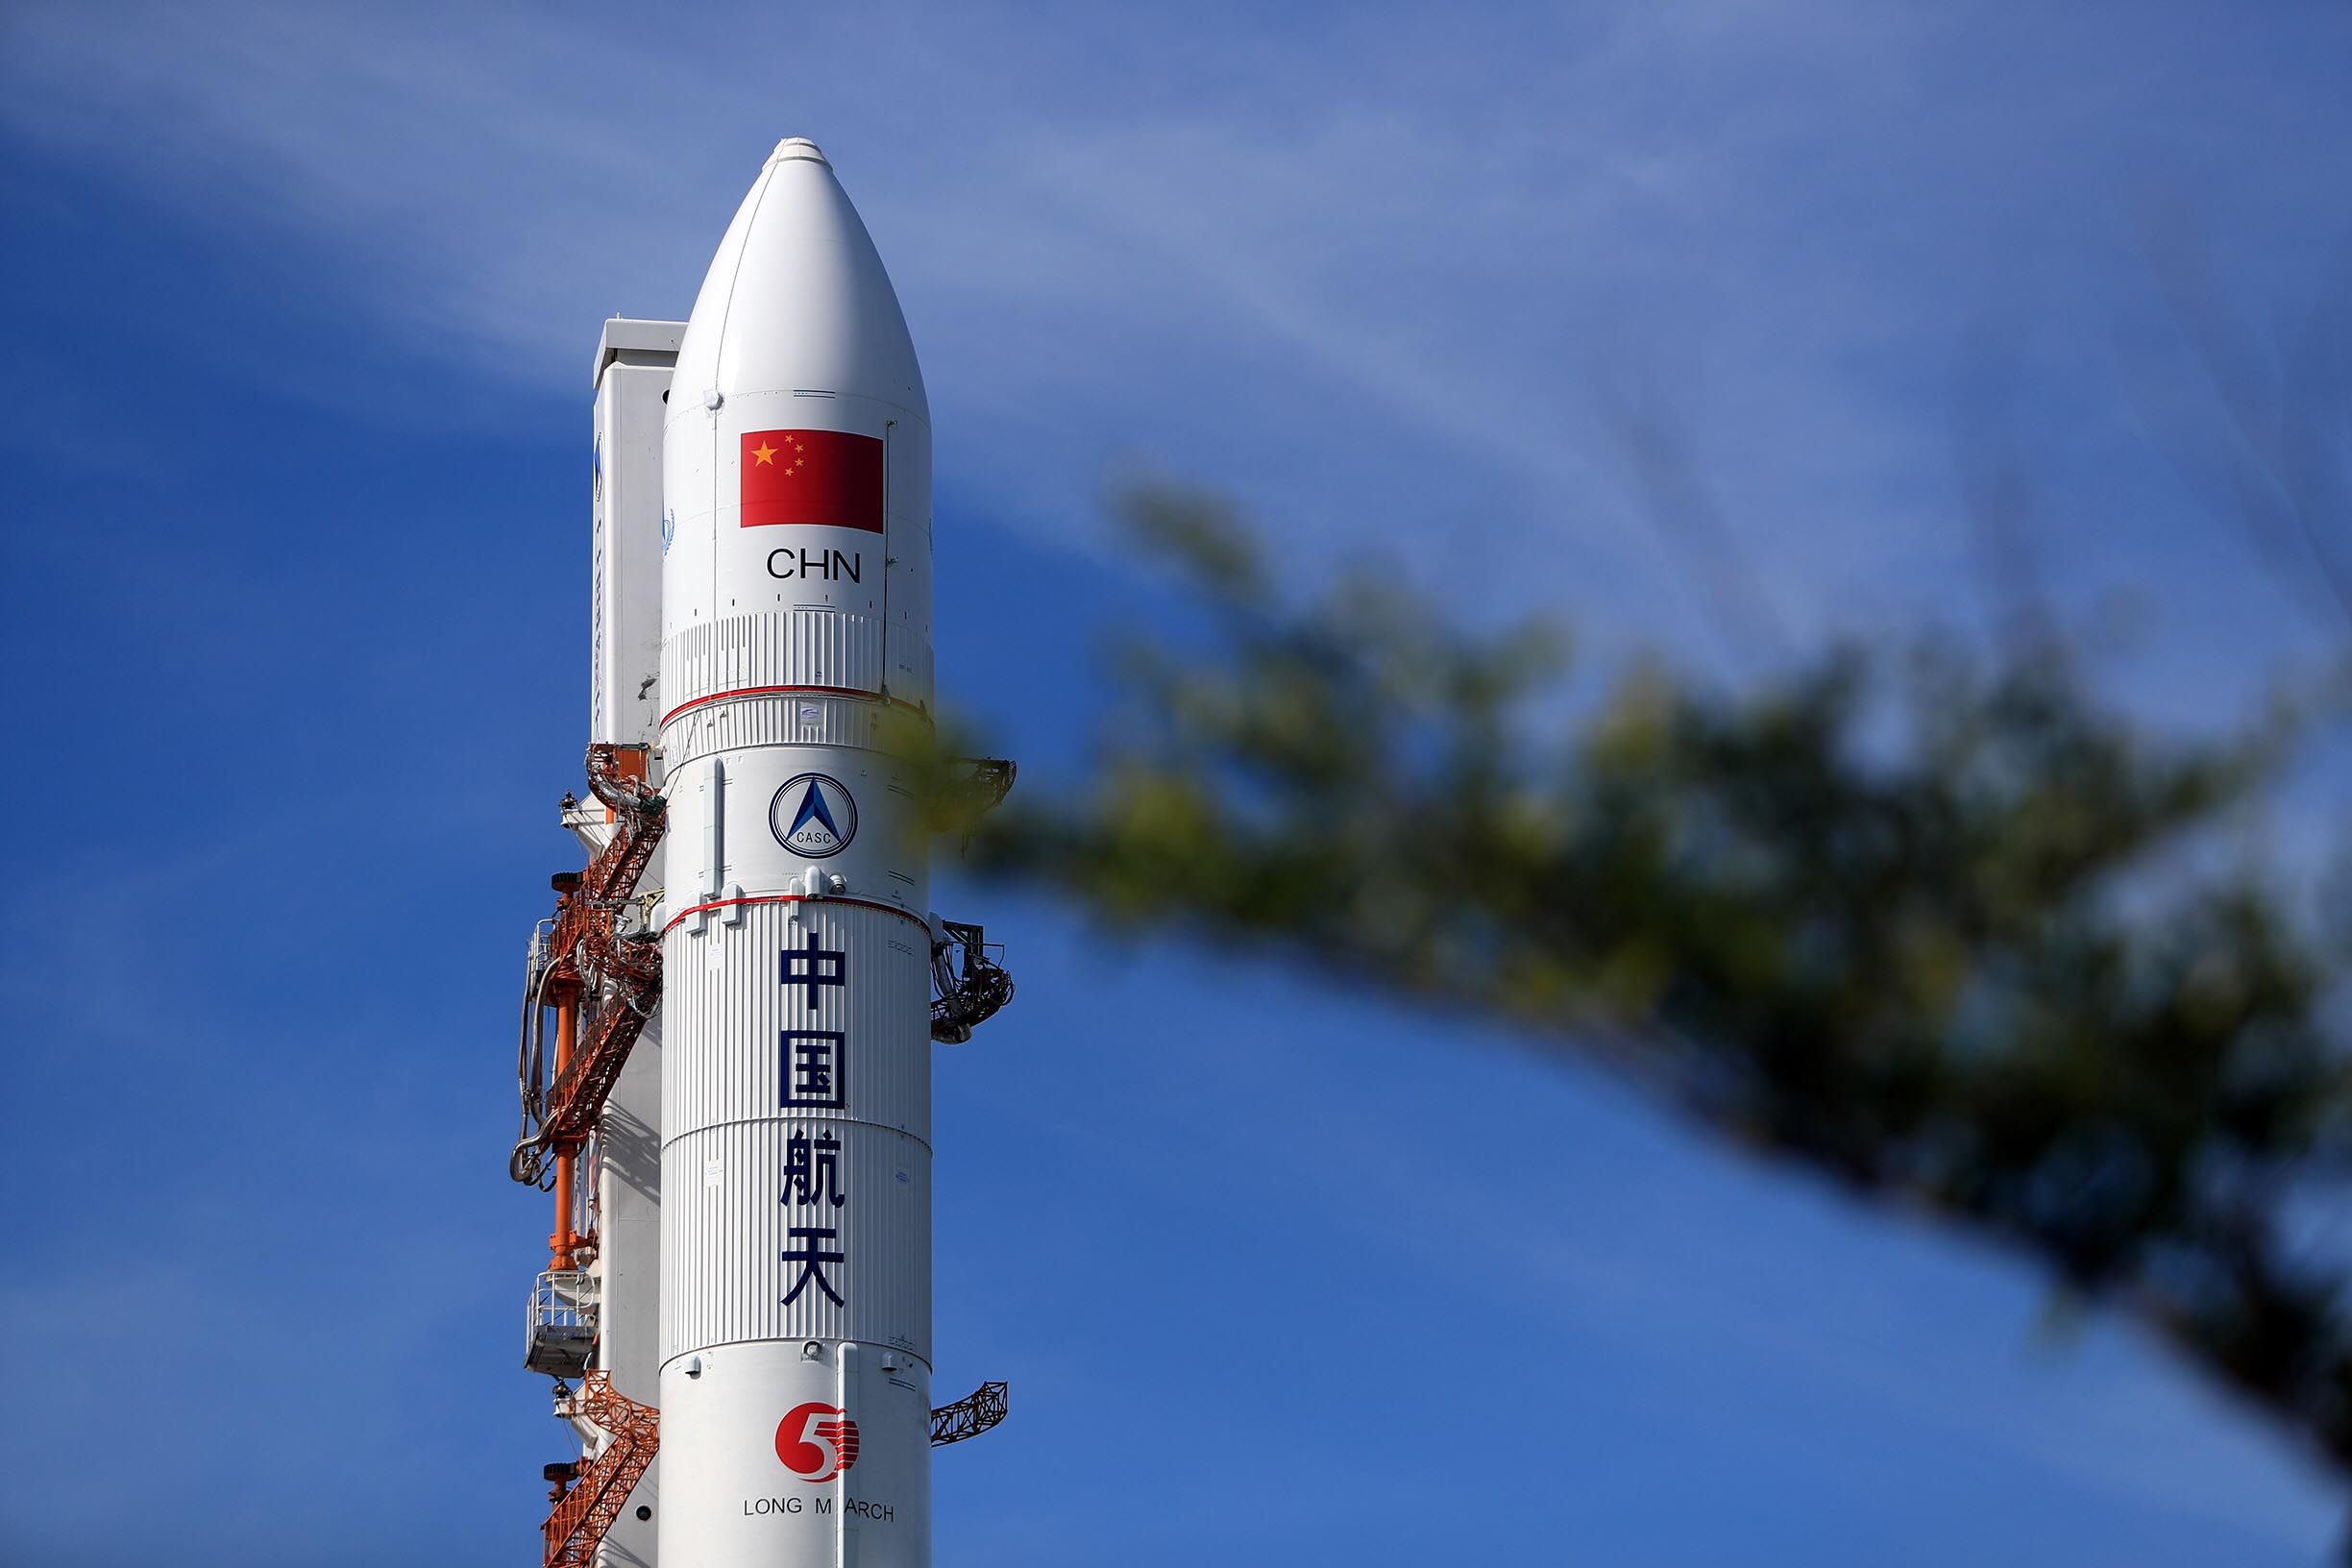 Chinese state-backed company will begin its space tourism flights by 2028